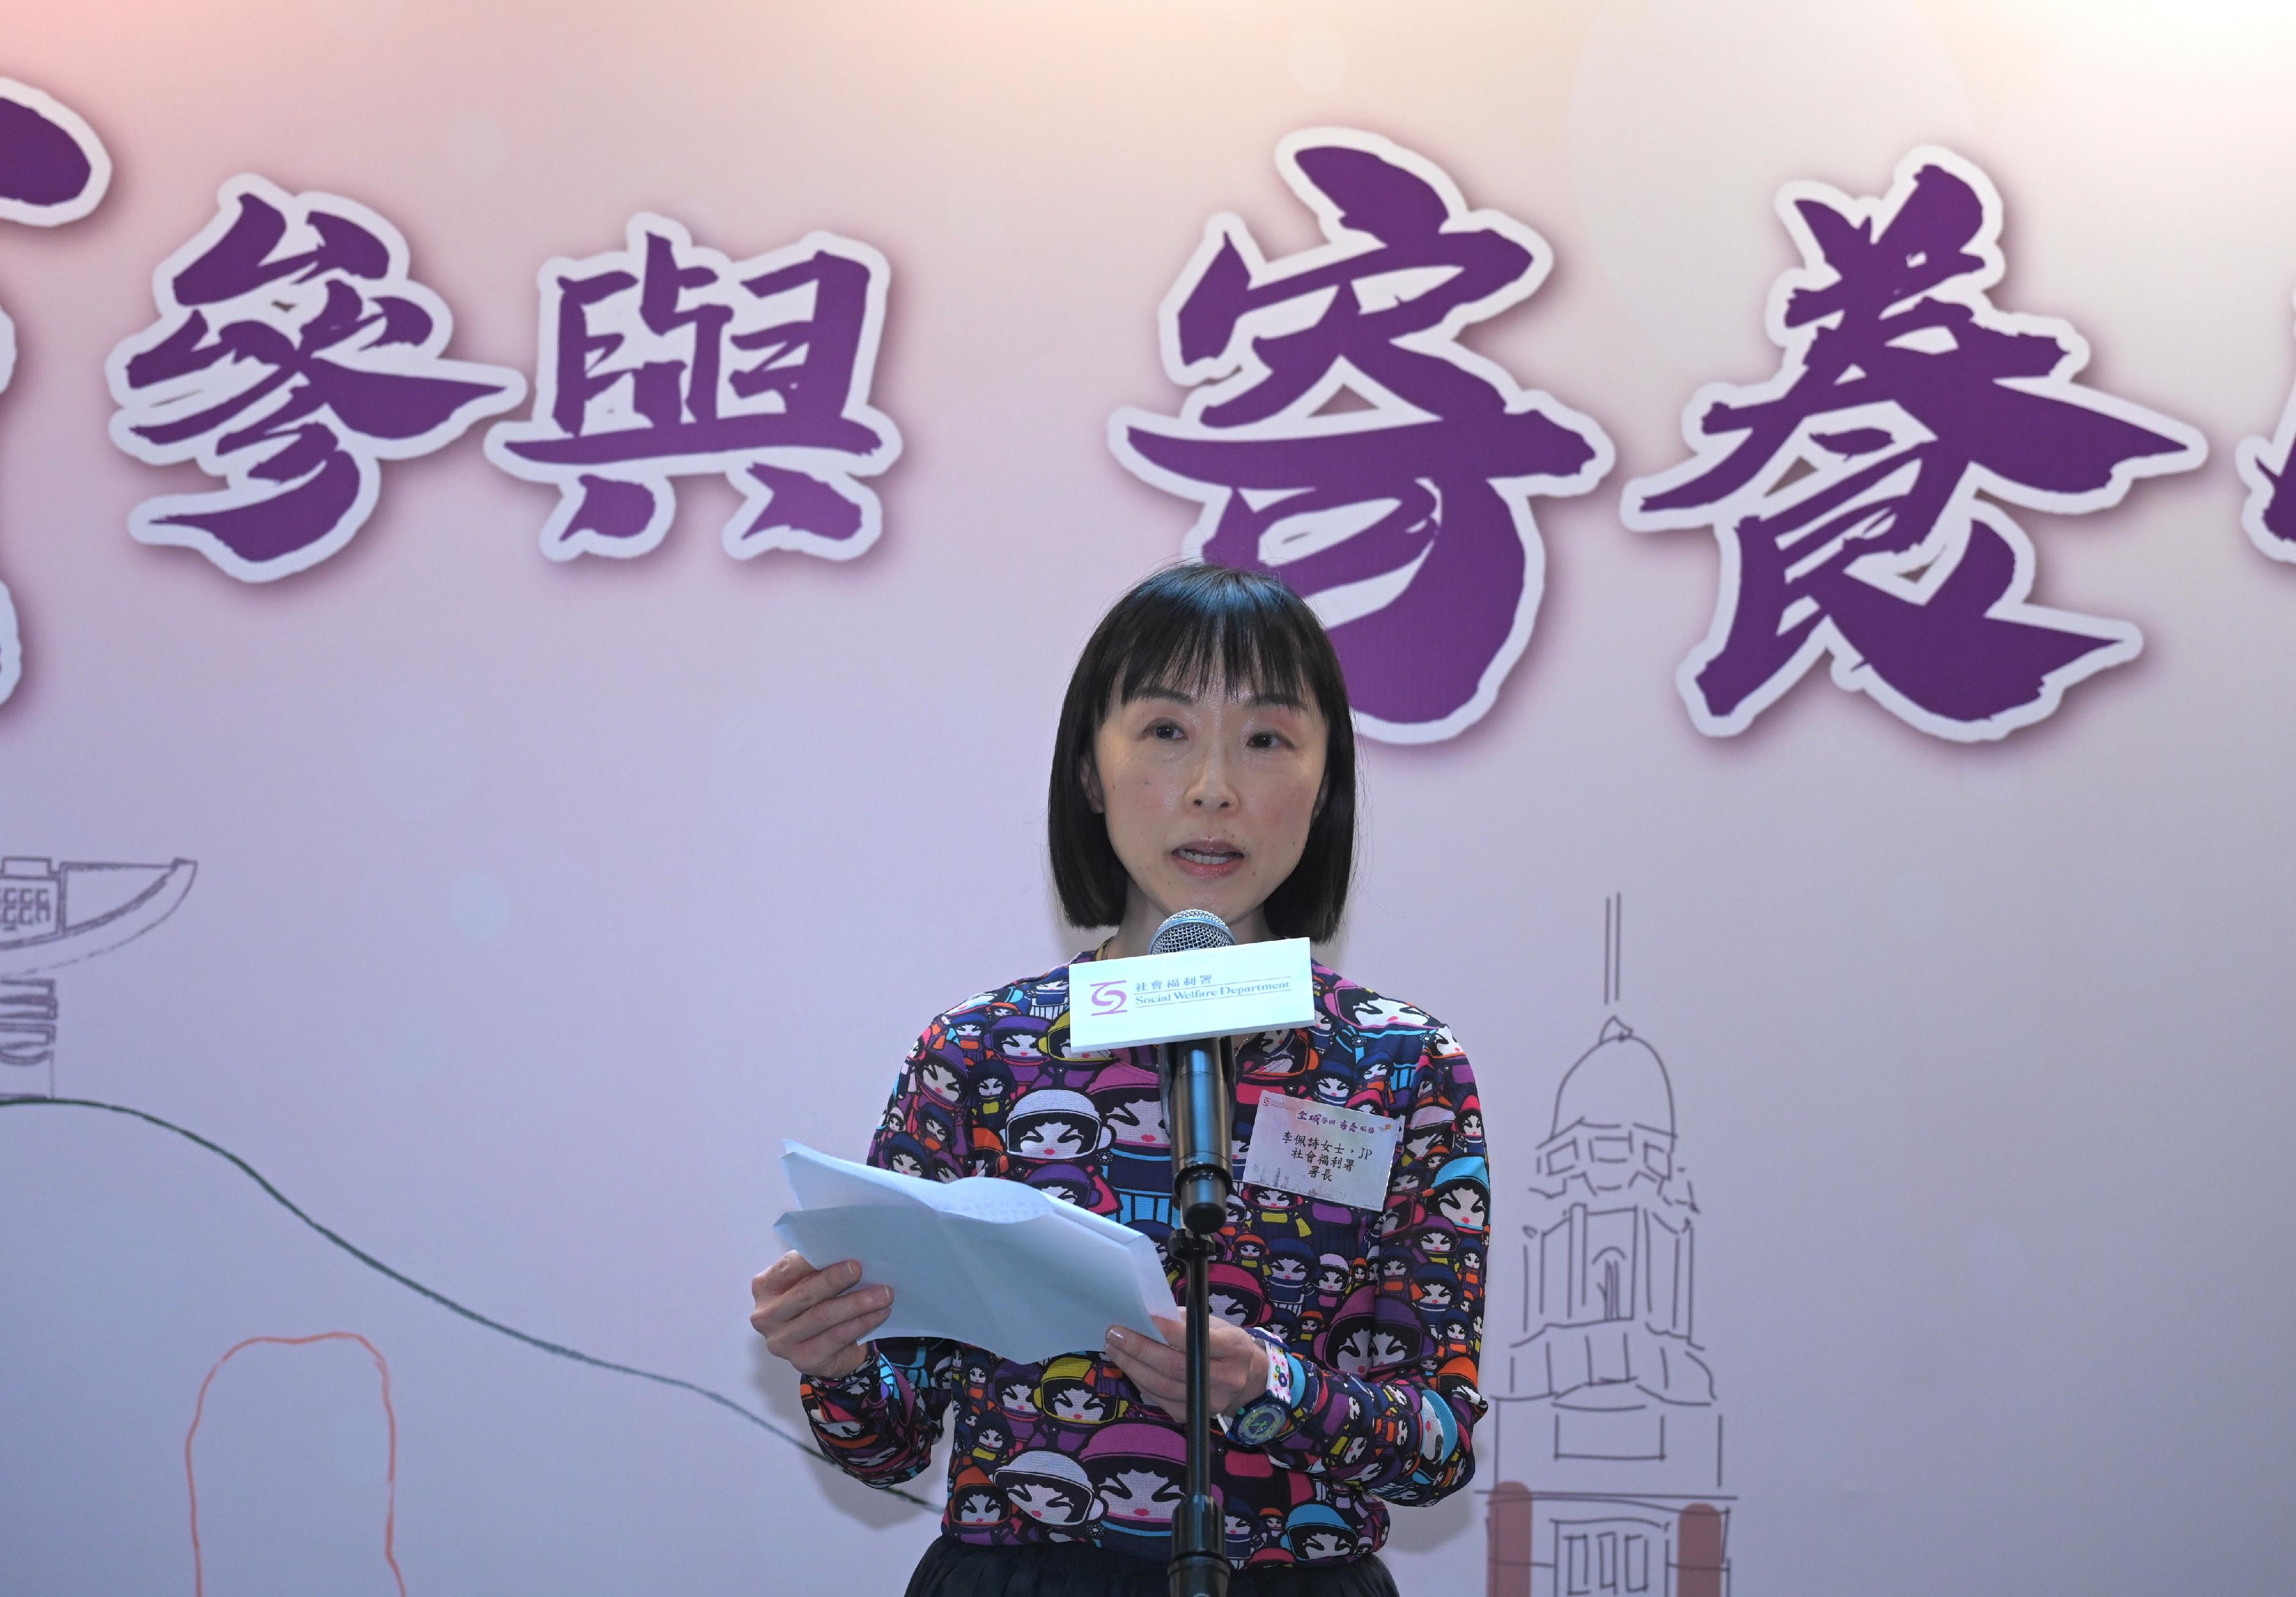 The Social Welfare Department today (May 14) organised the Let's Join Foster Care Service event which aimed to enhance public understanding on foster care service with game booths and a thematic exhibition. Photo shows the Director of Social Welfare, Miss Charmaine Lee, addressing the event.